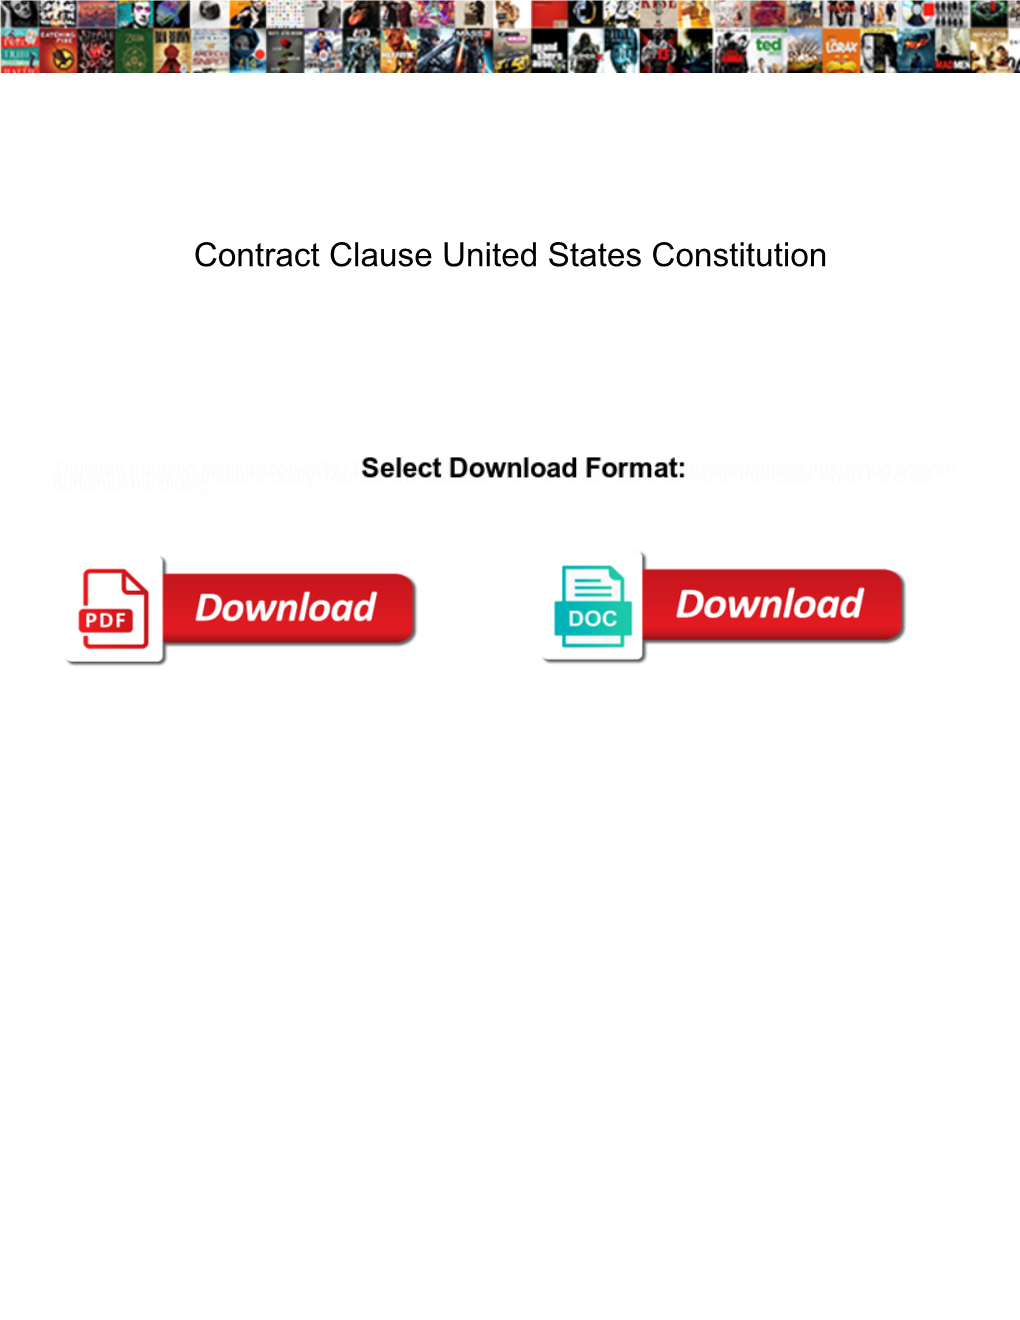 Contract Clause United States Constitution